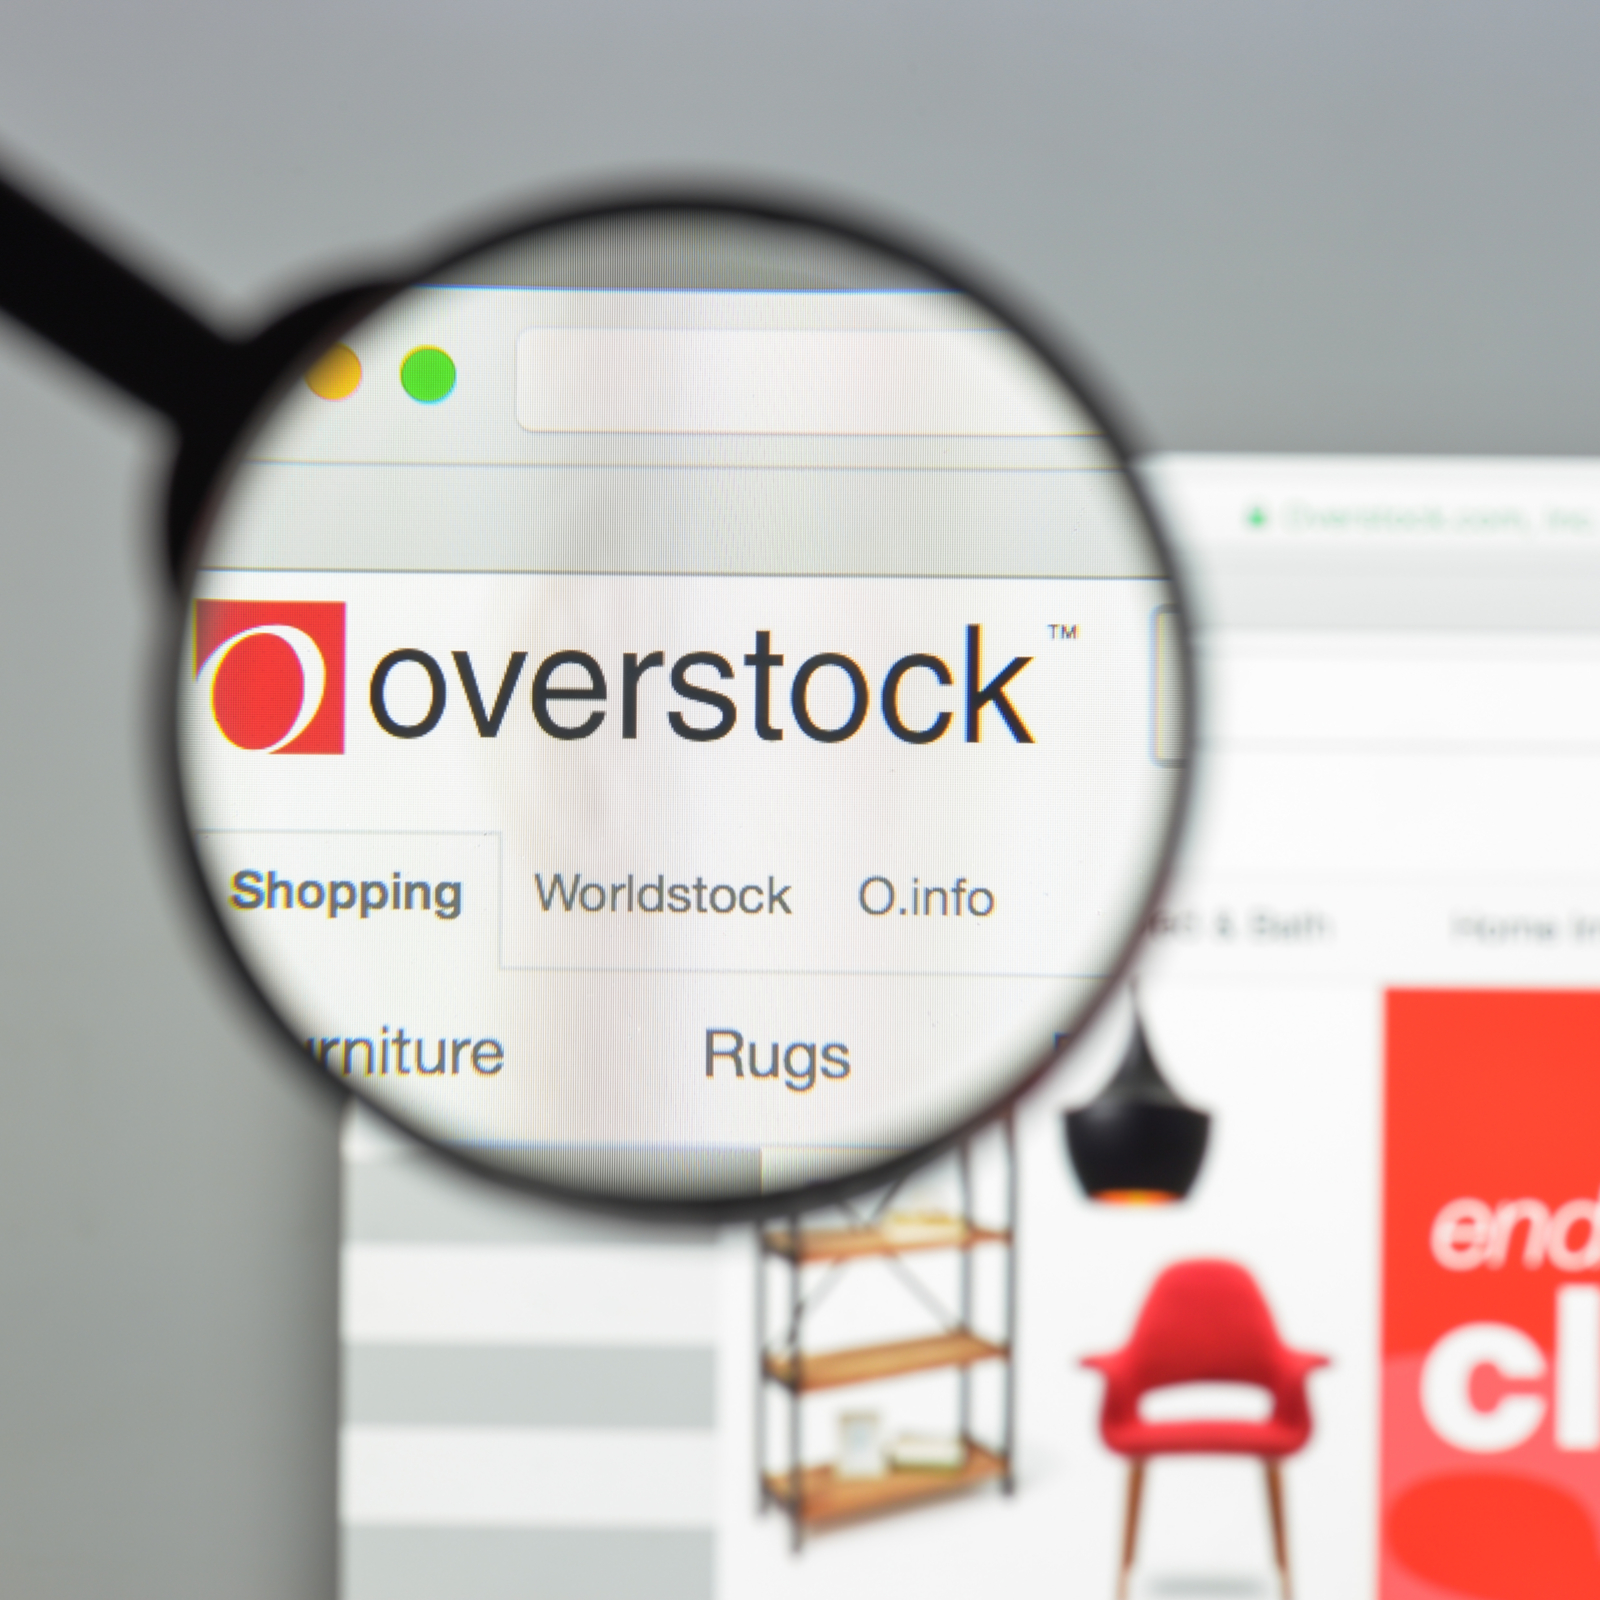 Overstock Announces Alaska as State Conducting Most Cryptocurrency Purchases